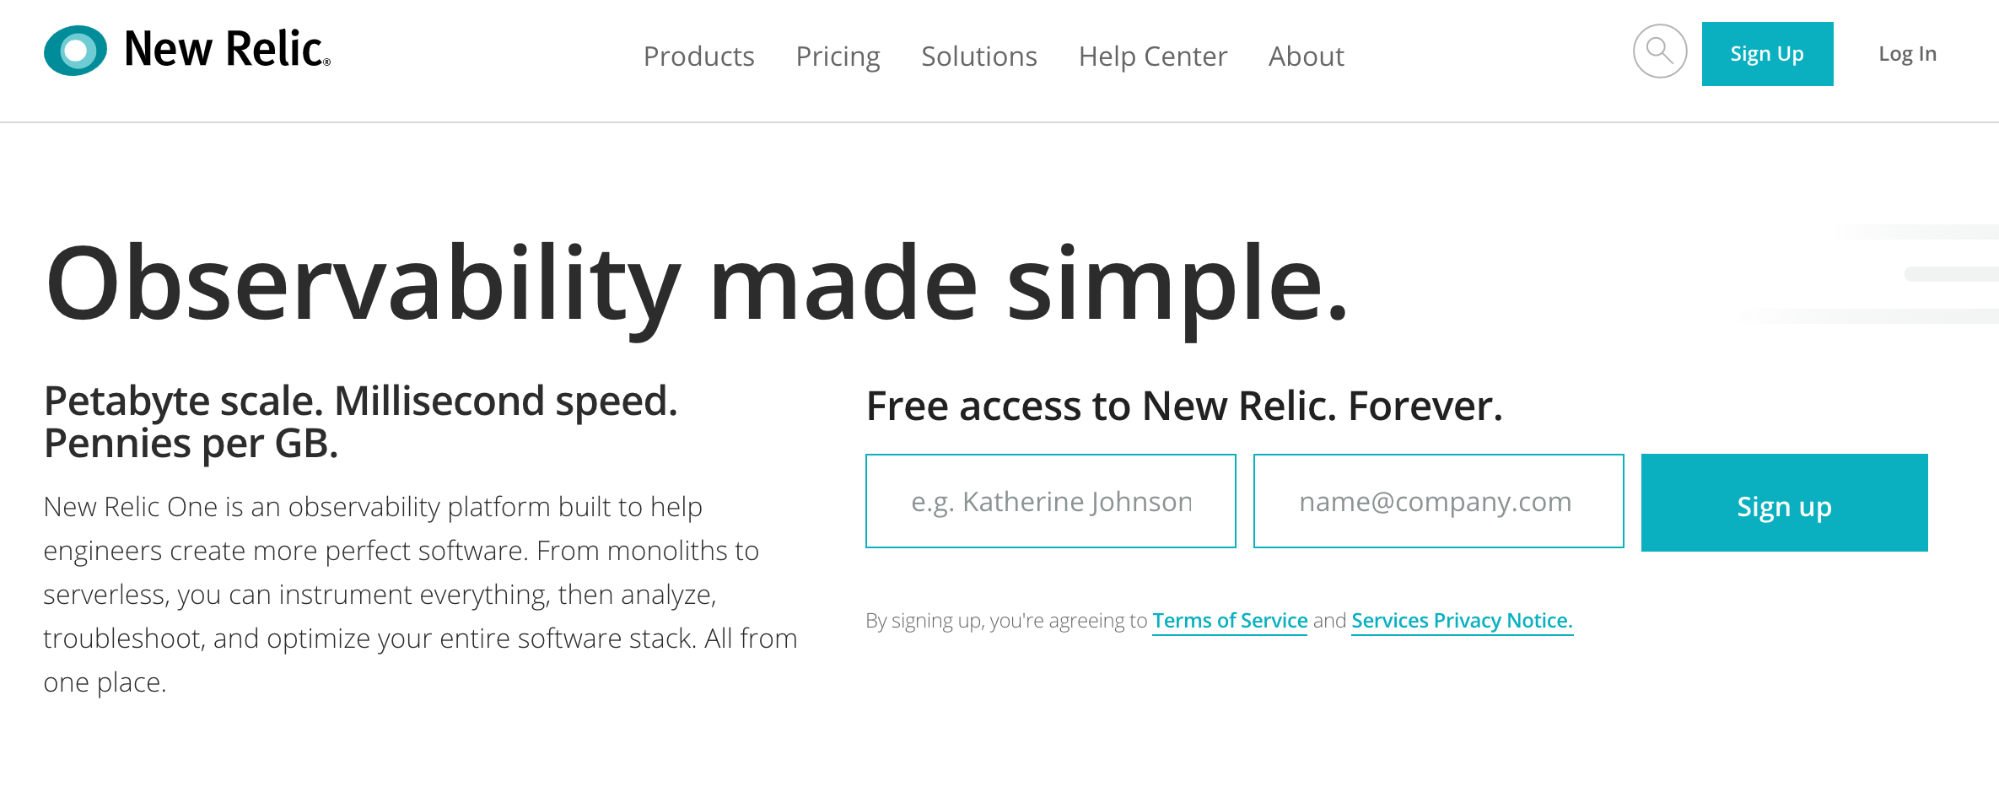 New Relic consolidated all products under the Observability category.